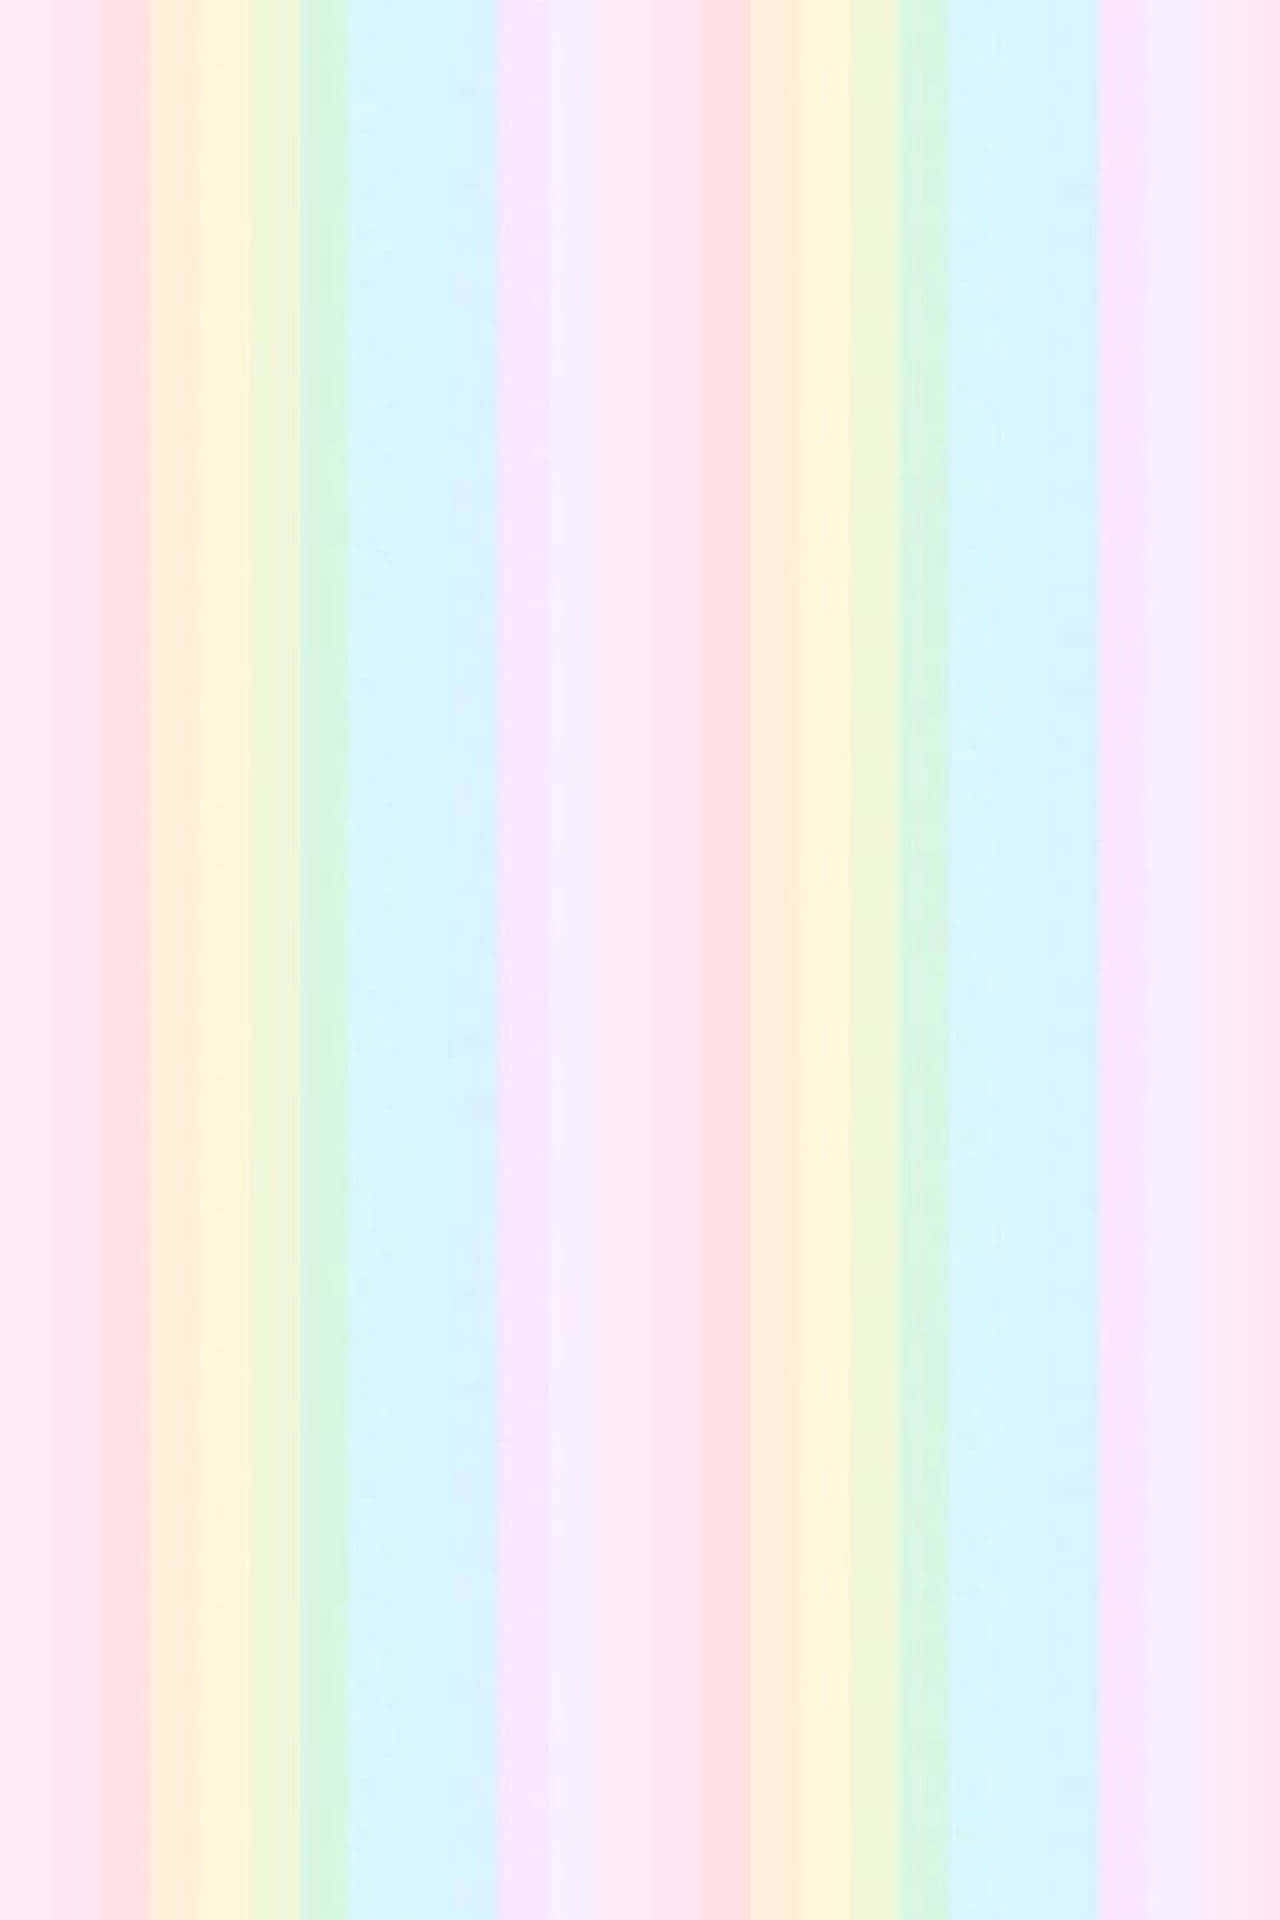 Add a Splash of Color to Your Desktop with this Pastel Rainbow Background